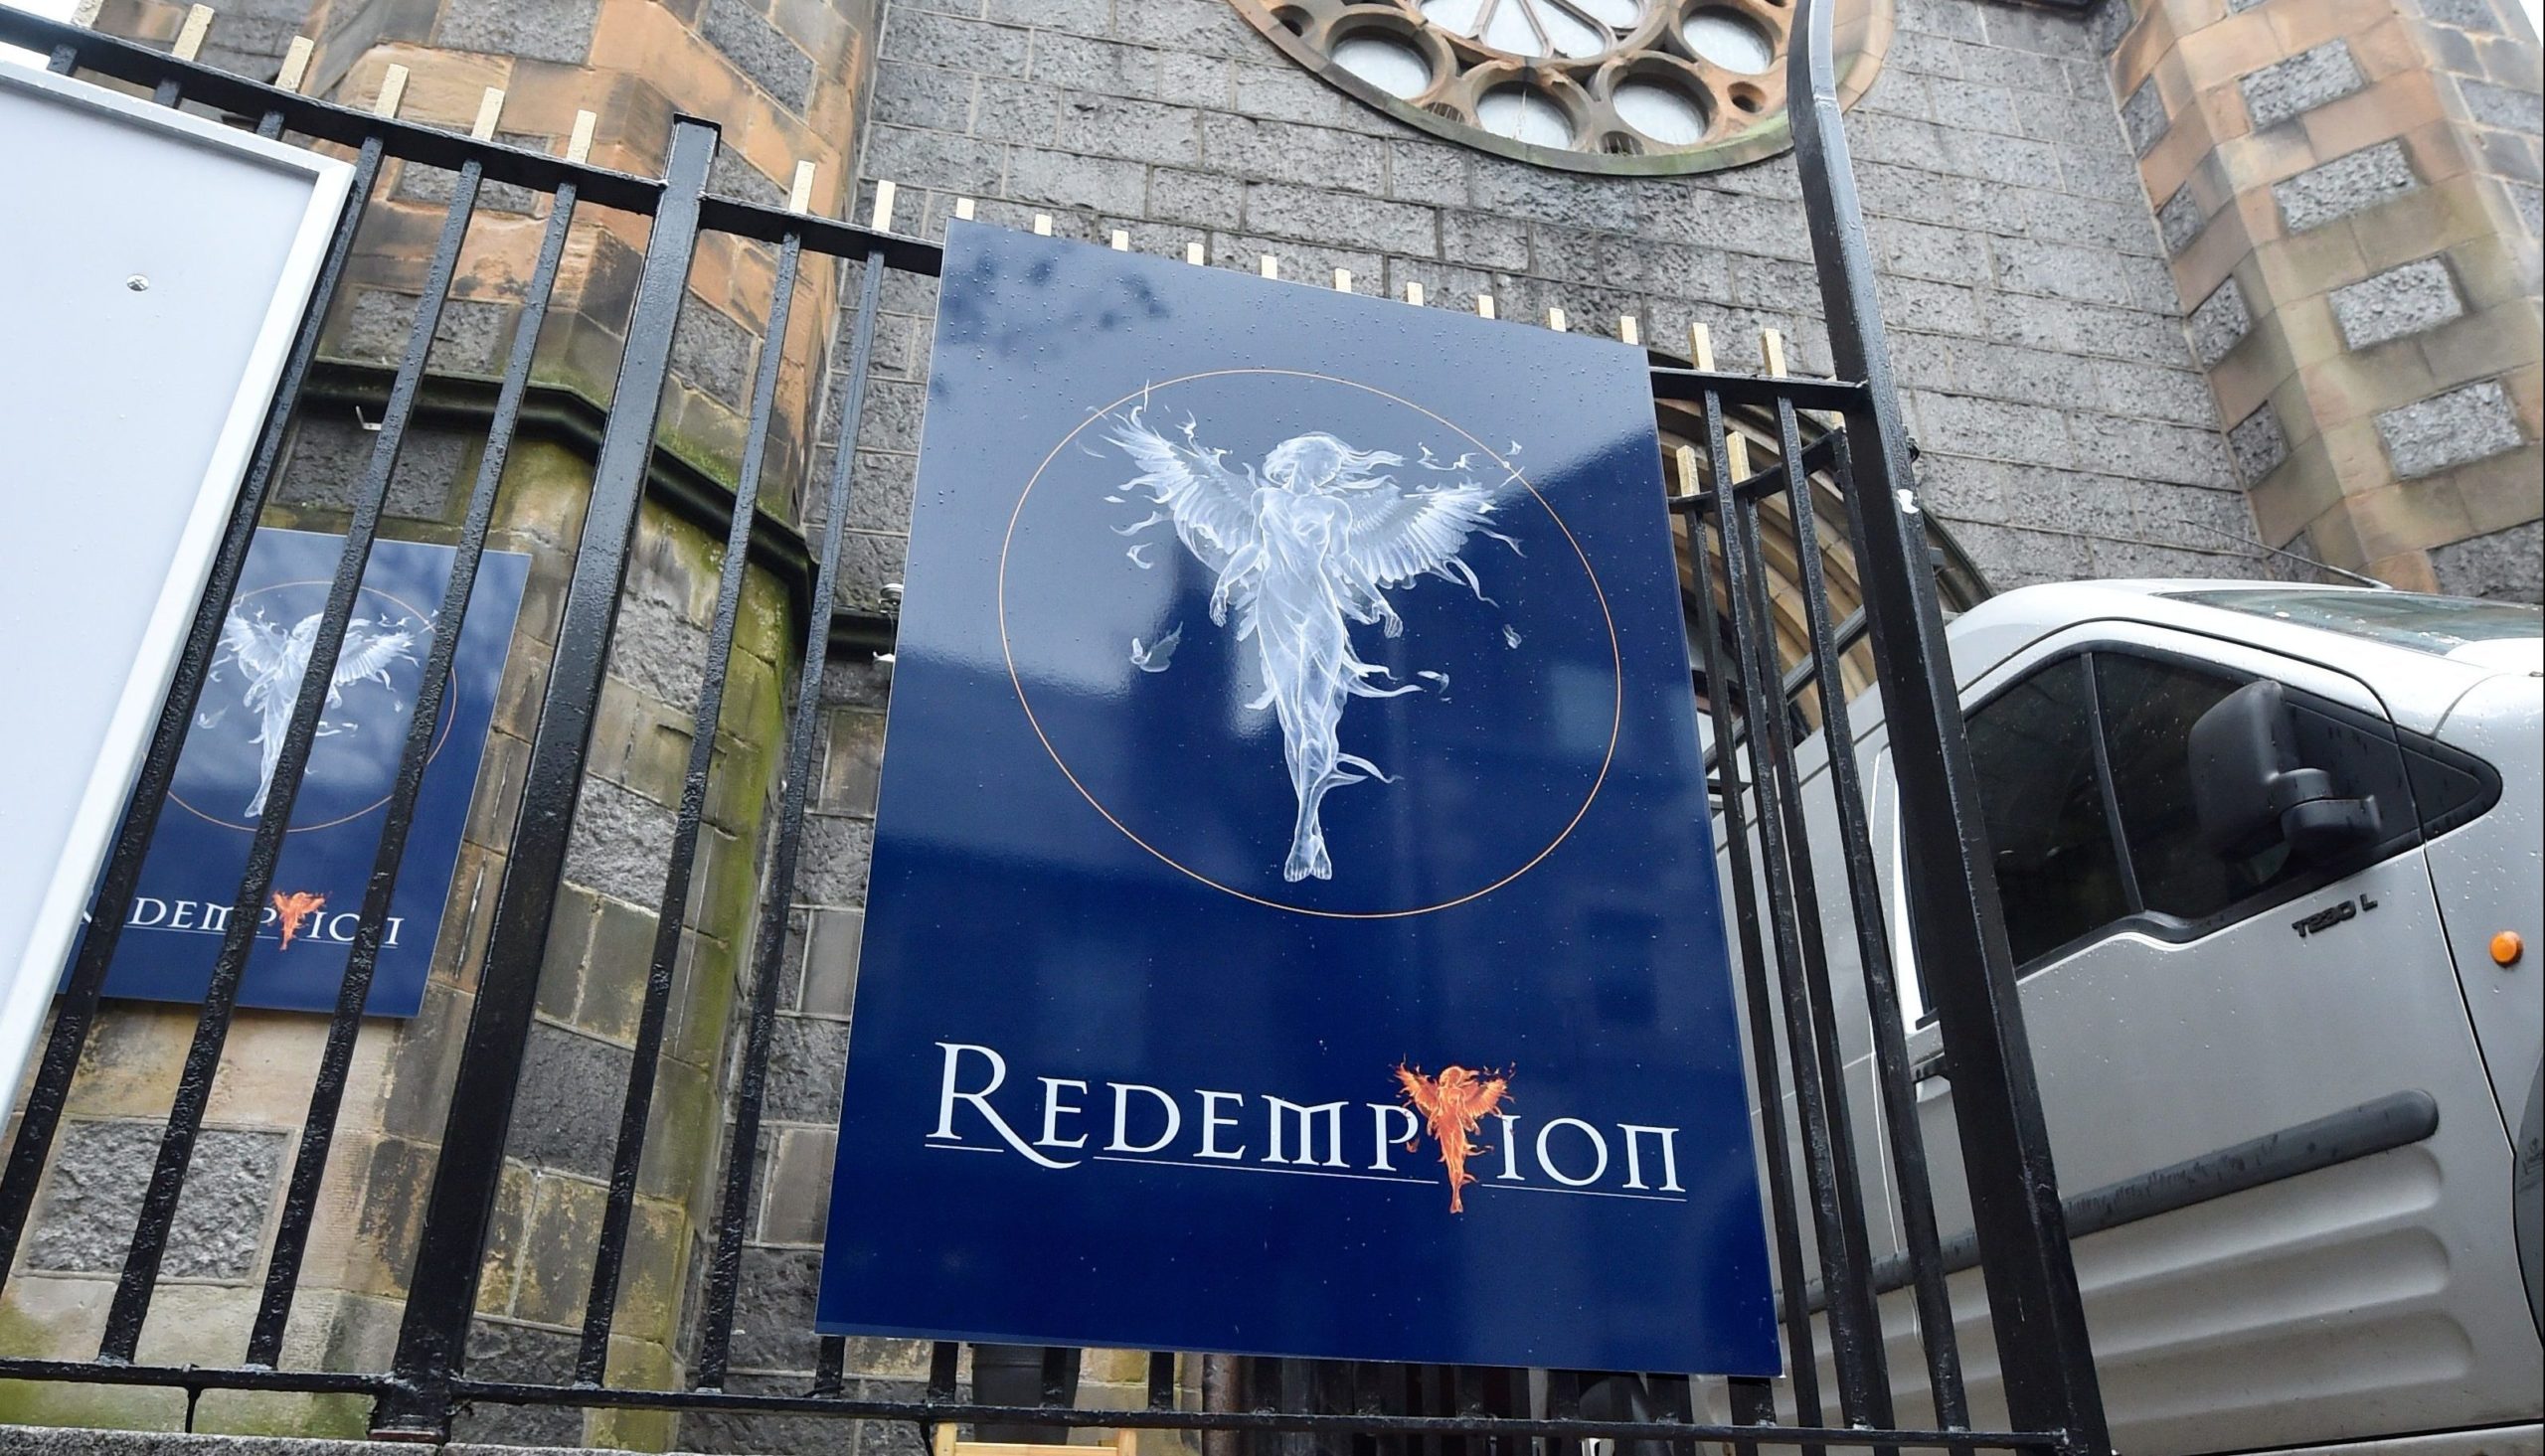 Redemption, previously known as The Priory, has shut down. 